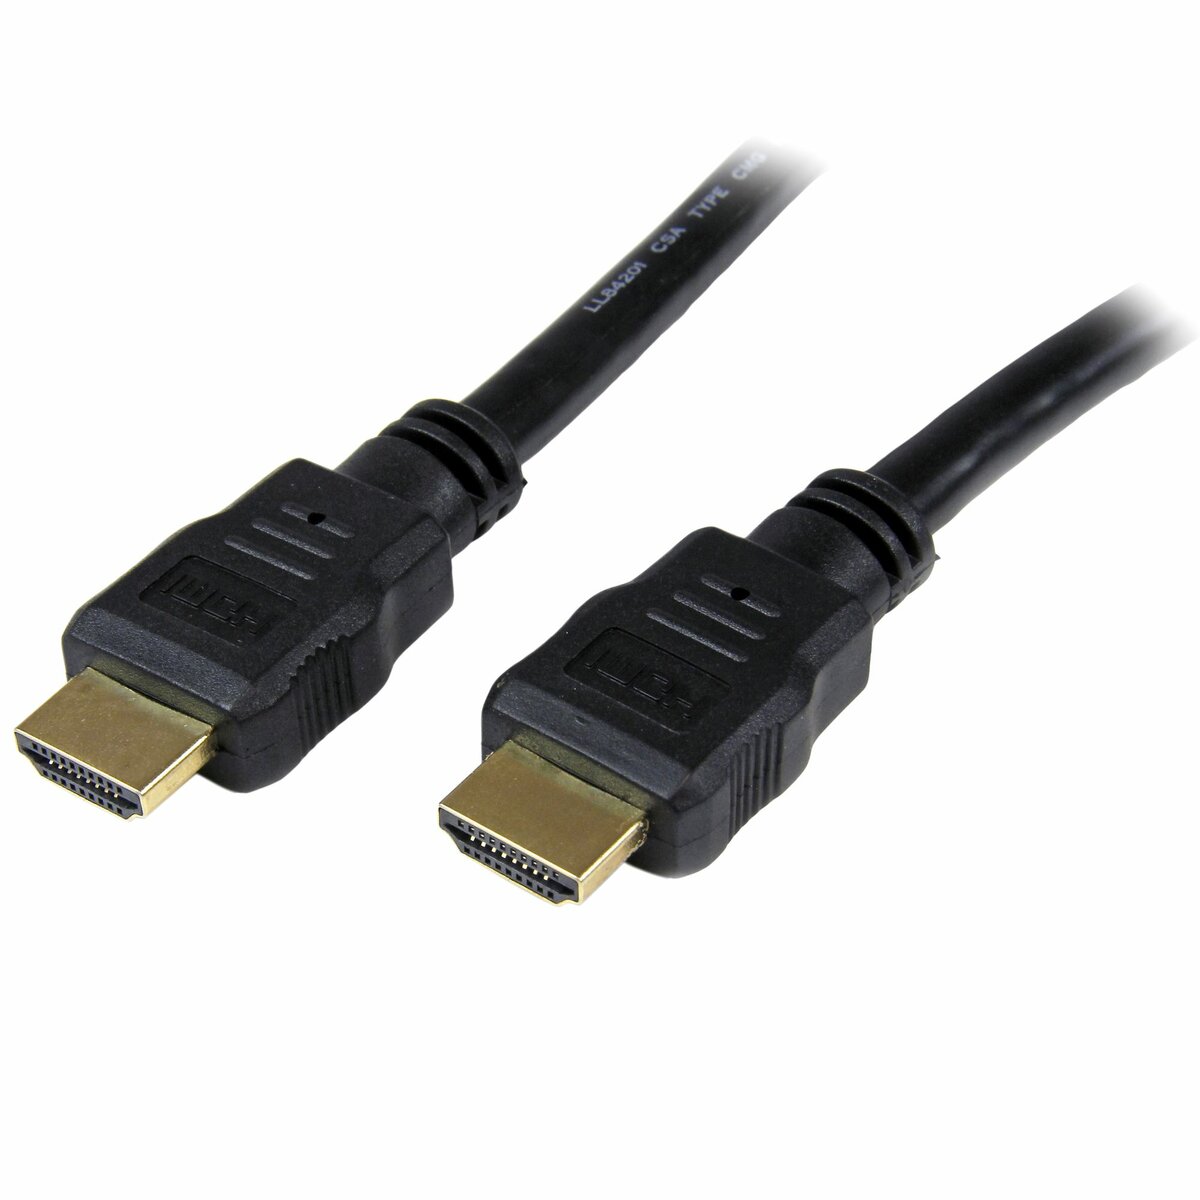 Product  StarTech.com 5m High Speed HDMI Cable - Ultra HD 4k x 2k HDMI  Cable - HDMI to HDMI M/M - 5 meter HDMI 1.4 Cable - Audio/Video Gold-Plated  (HDMM5M) - HDMI cable - 5 m